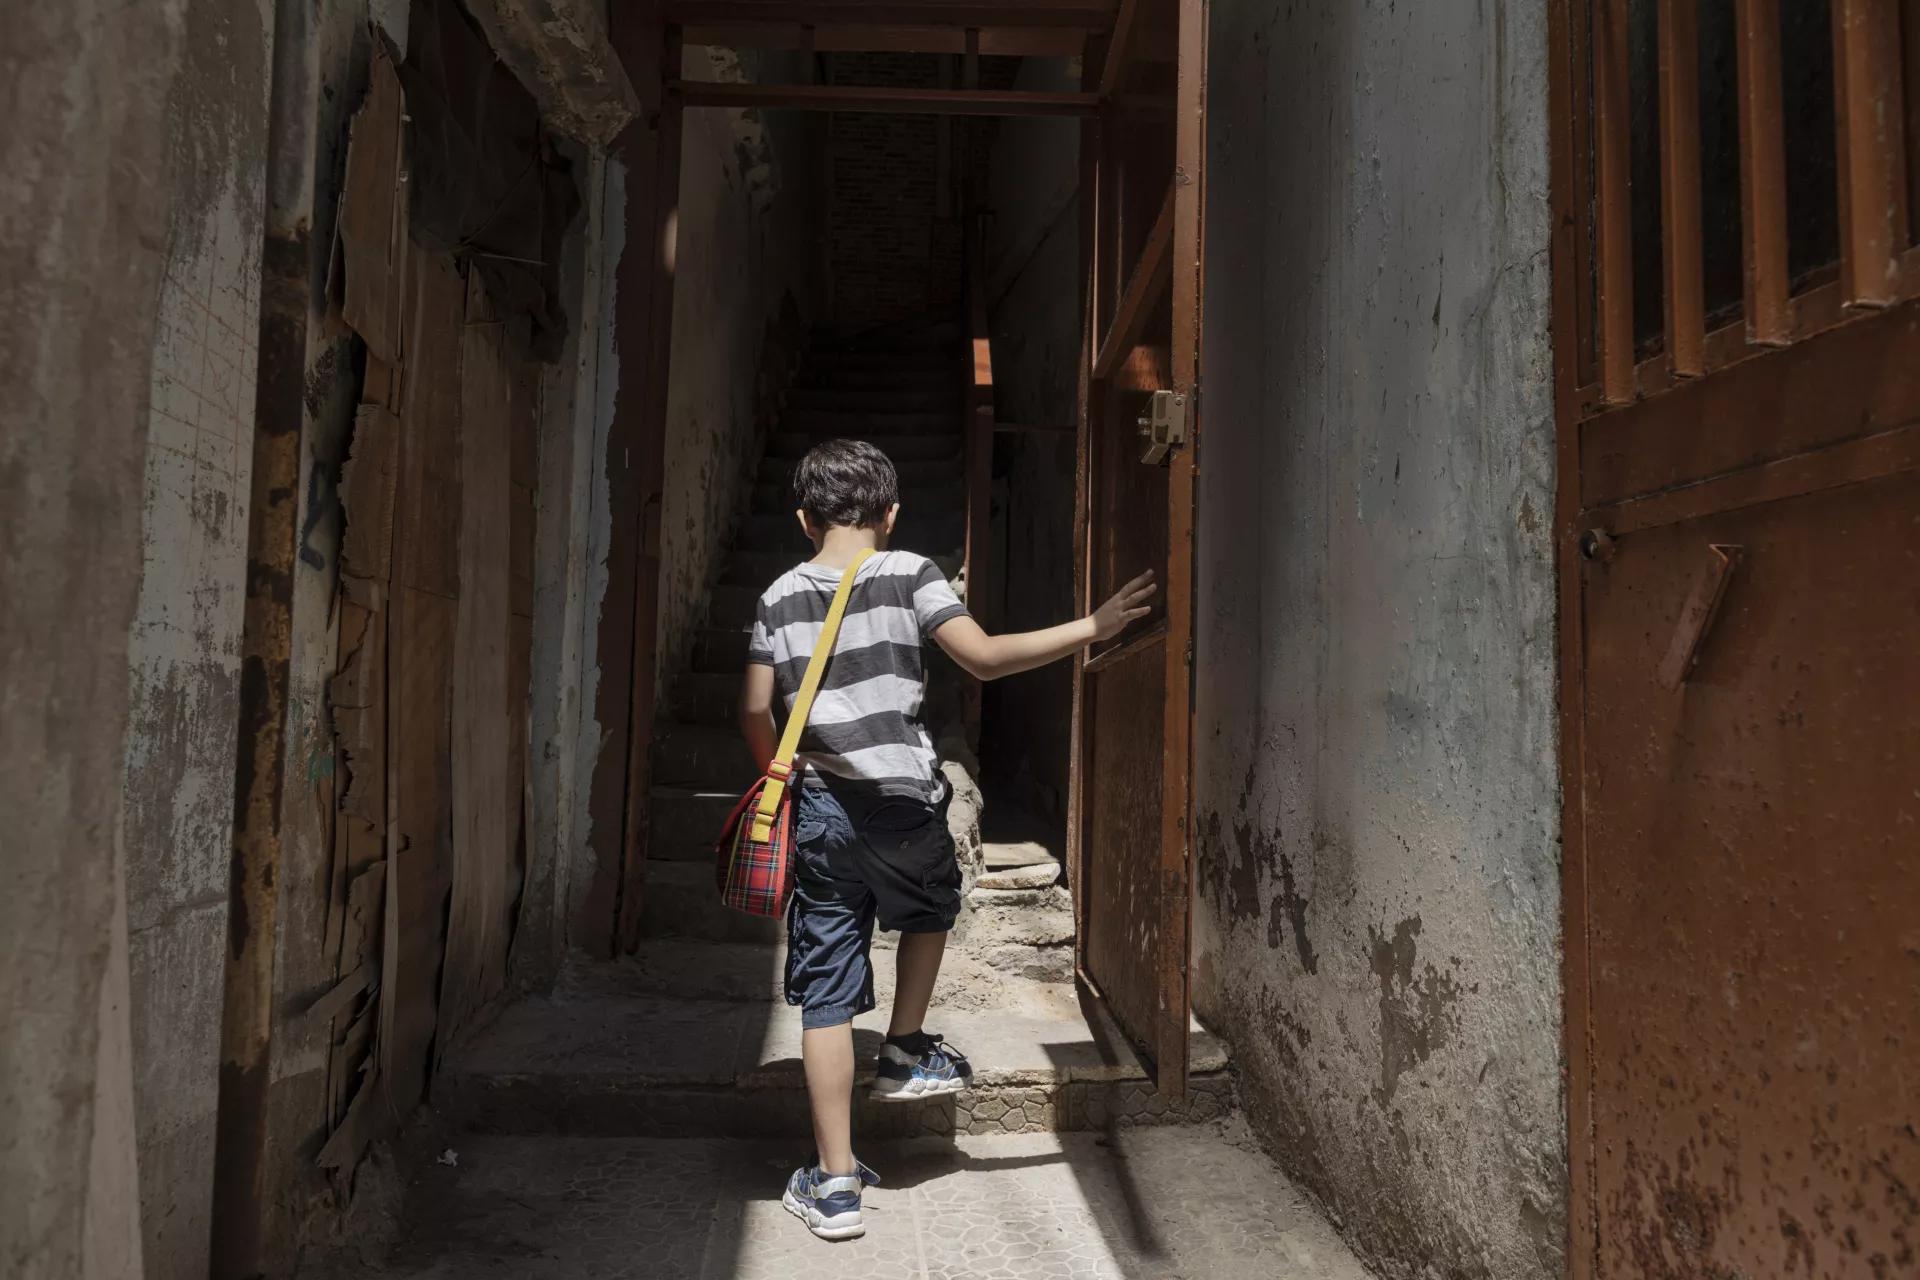 Omar, 6, a third-generation Palestinian refugee who was born in Lebanon, opens the door to his home in Burj al Barajneh informal settlement